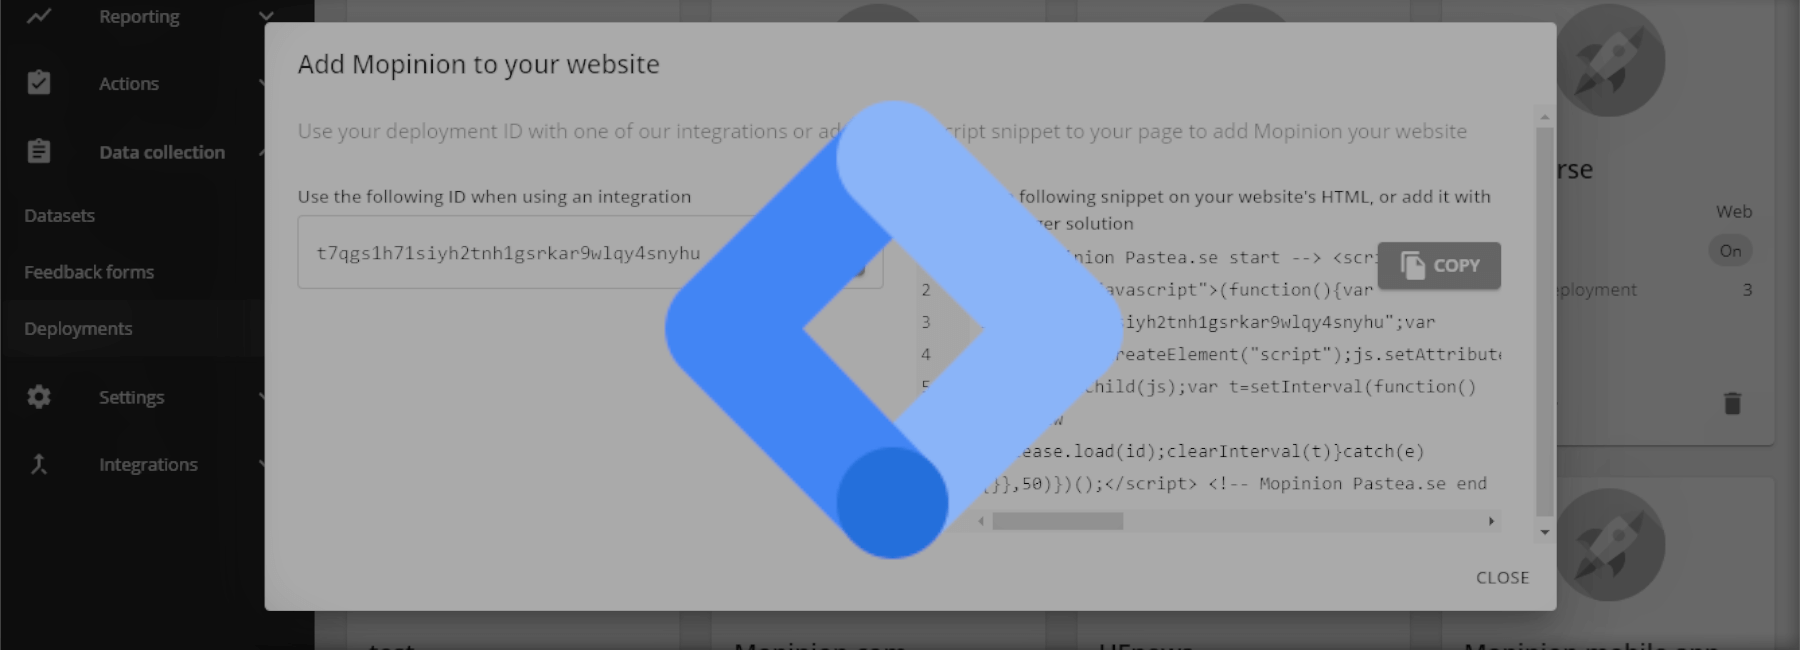 Mopinion introduces a template for Google Tag Manager (GTM)